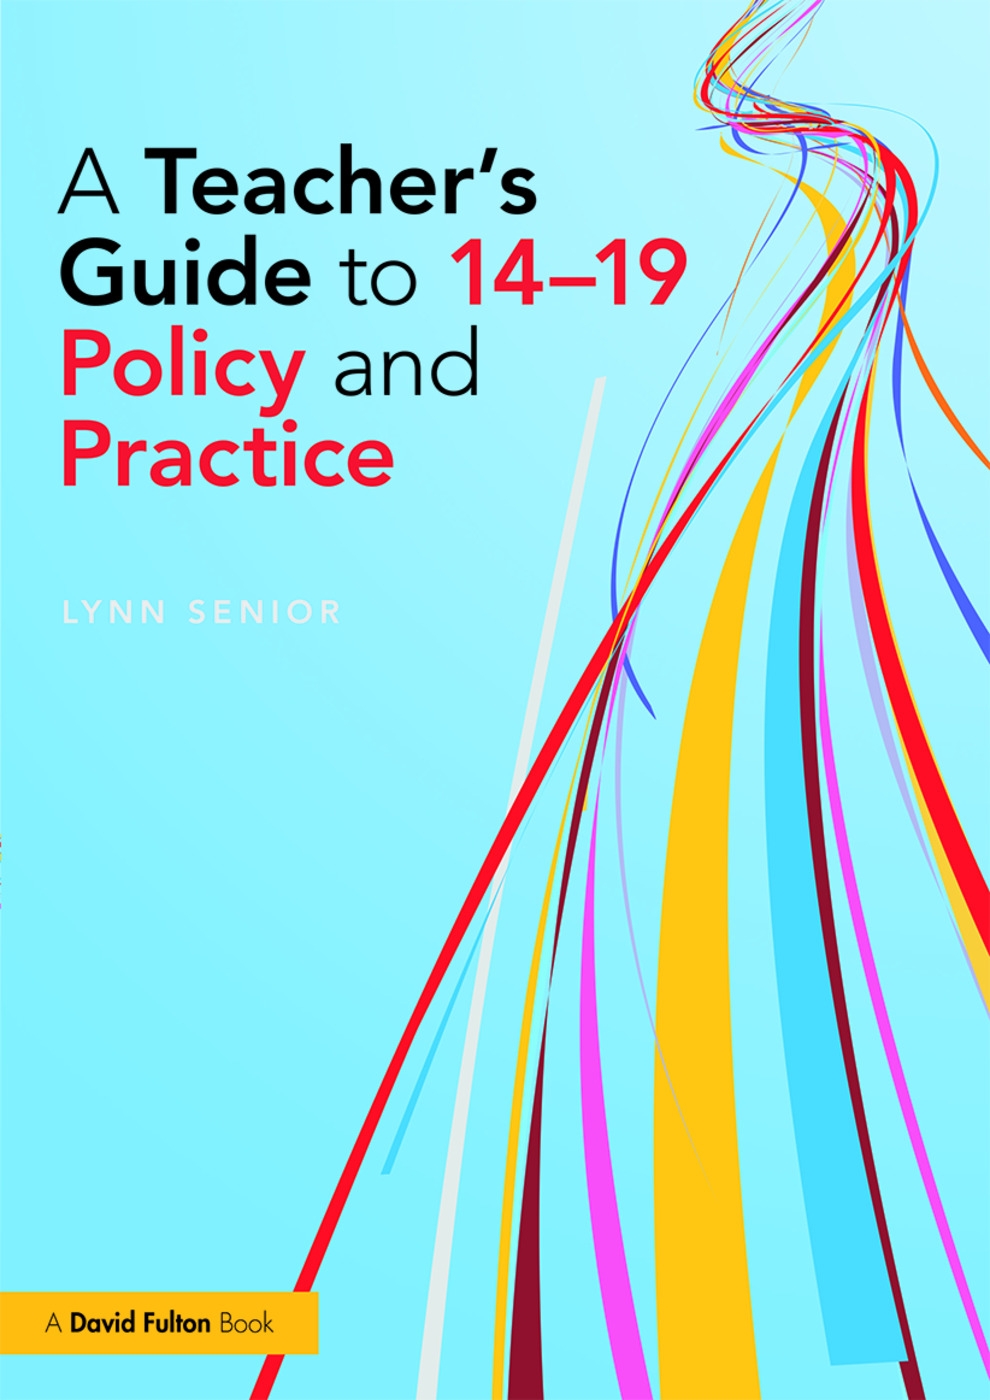 A Teacher’s Guide to 14-19 Policy and Practice